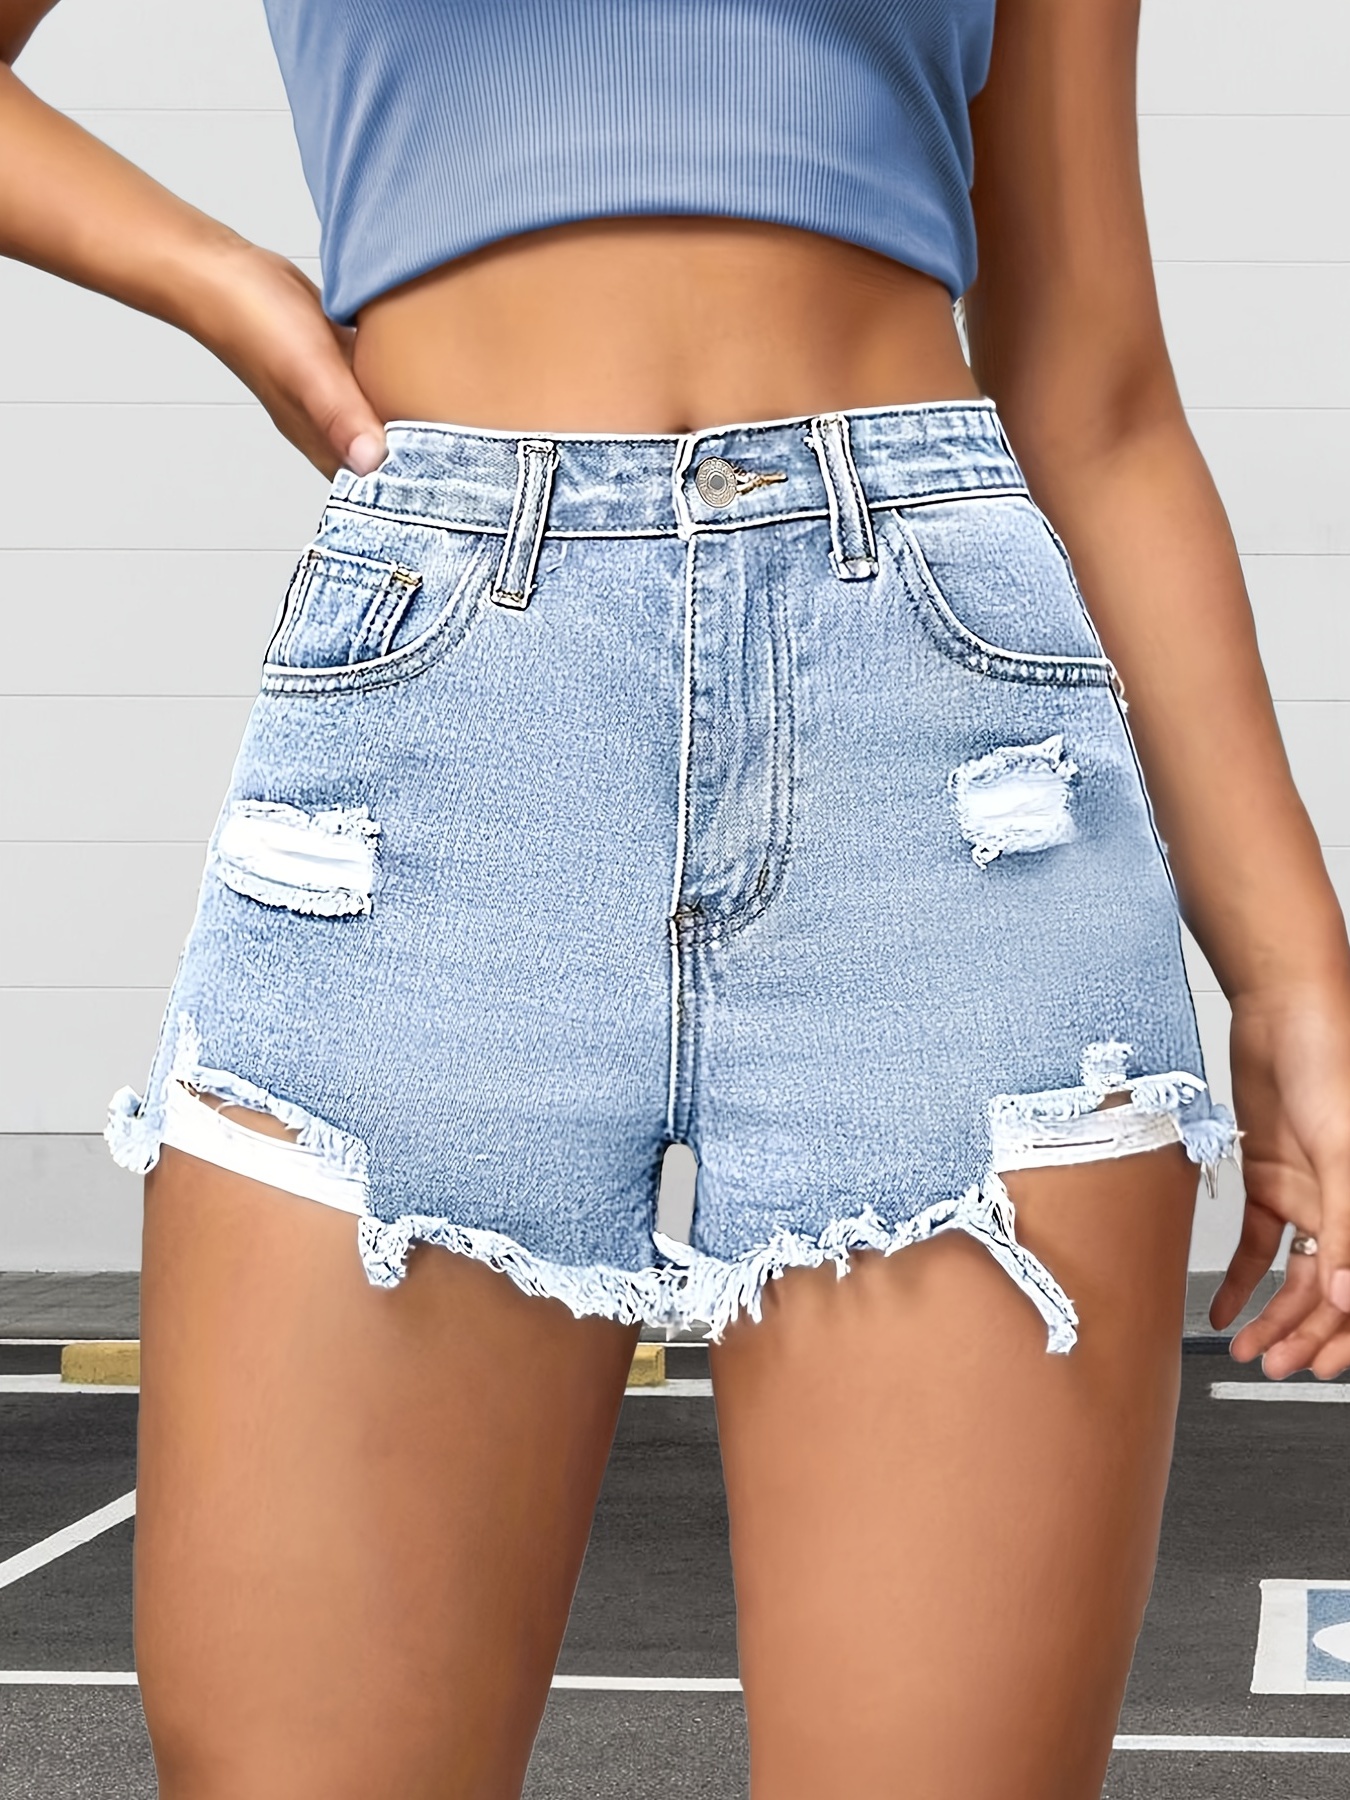 HSMQHJWE Short Shorts For Women Sliding Shorts Women Softball Shorts Jeans  Color Solid Blue With Ripped Pockets Women Denim Pants Power Compression  Shorts Women 